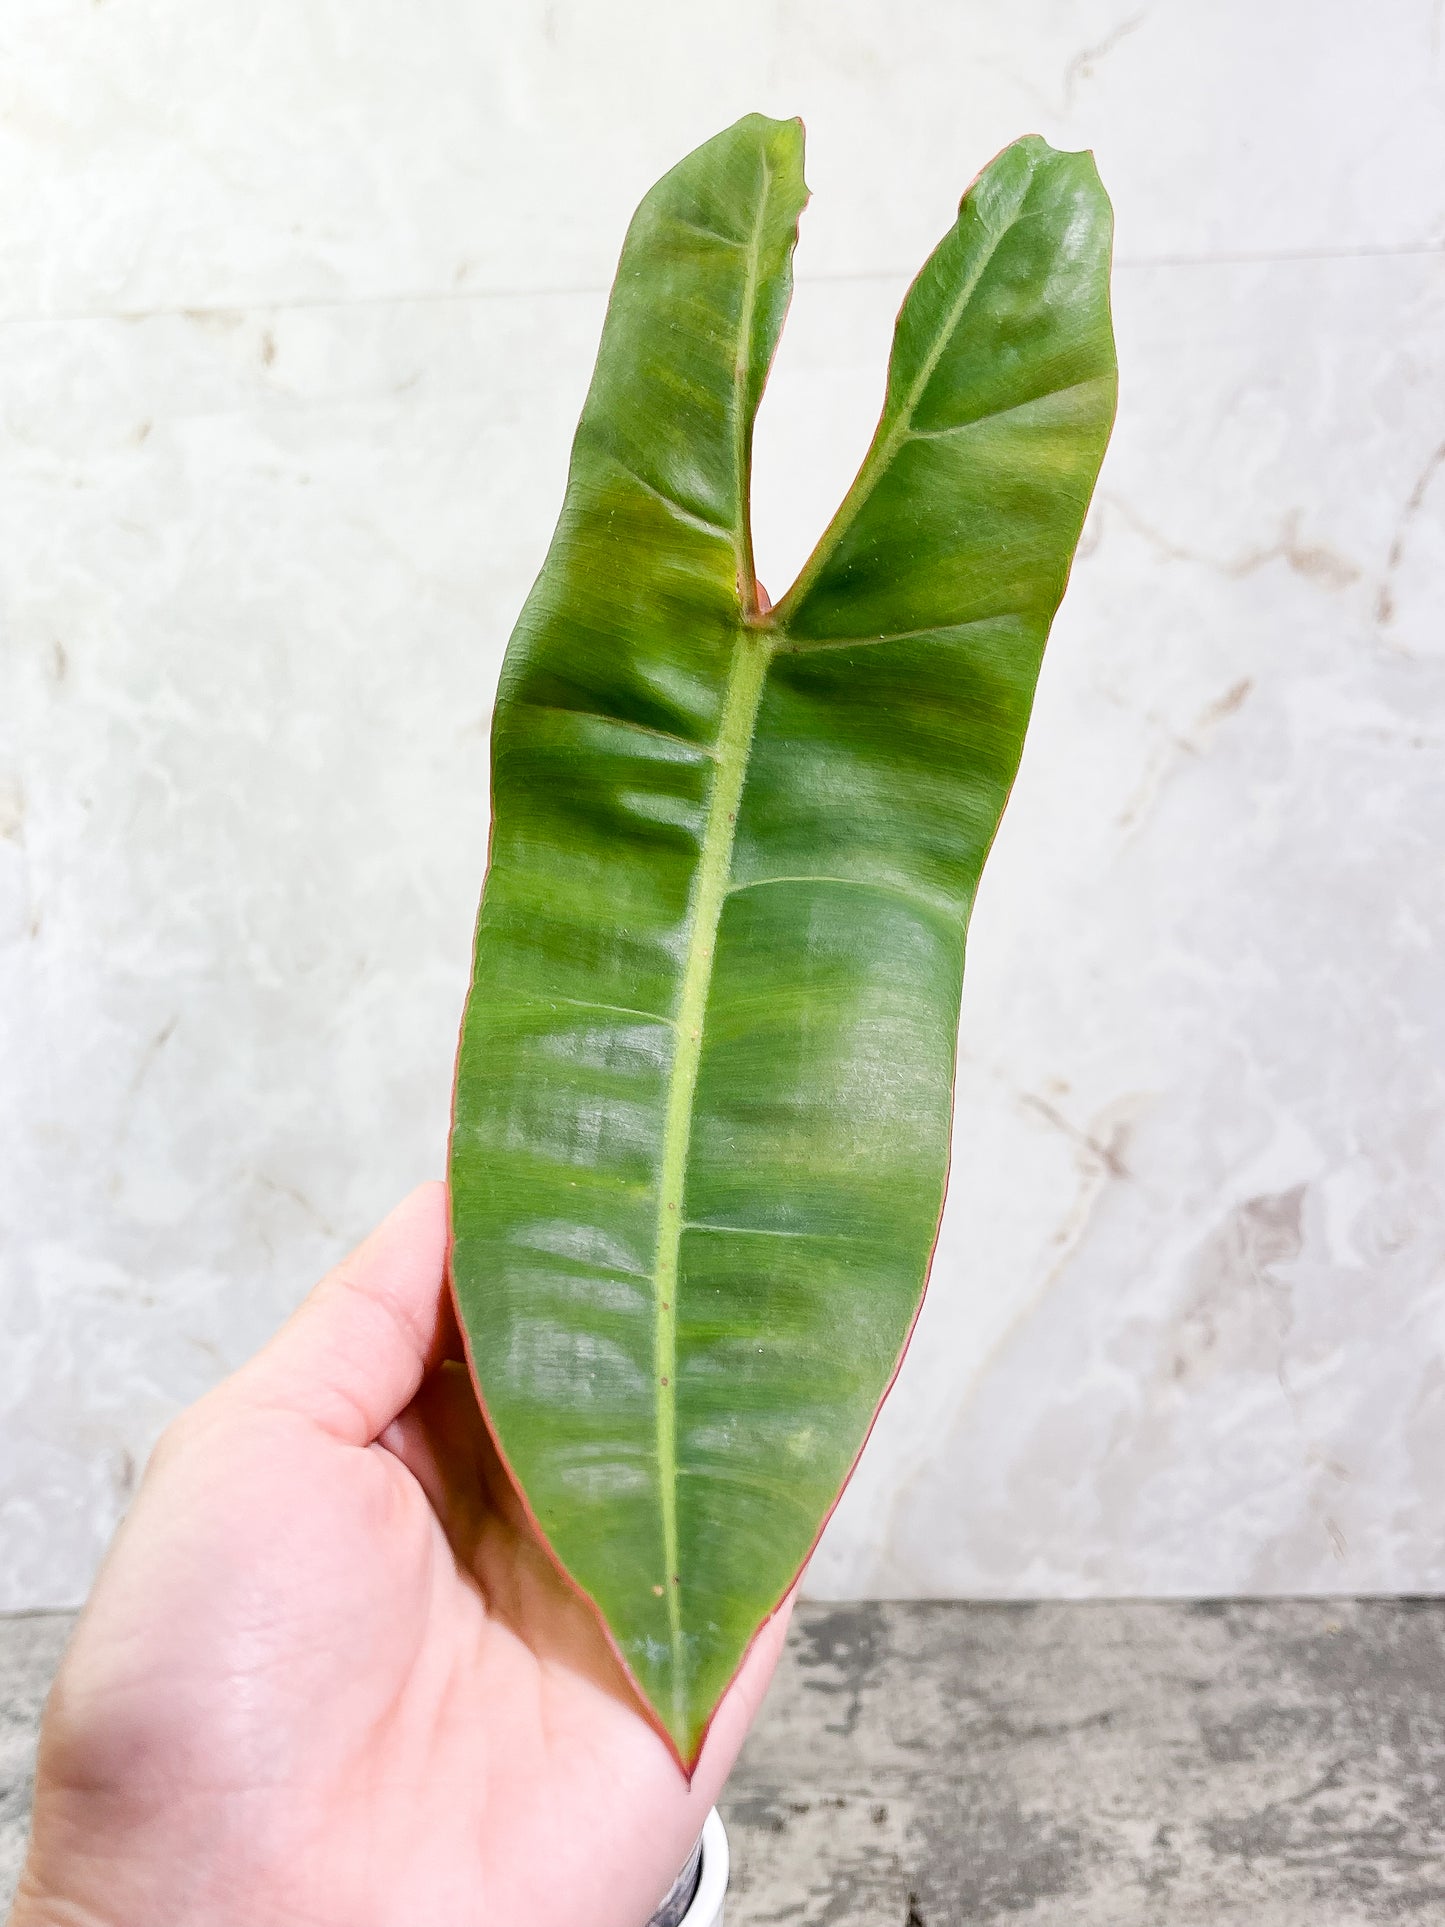 Philodendron Billietiae cutting with 1 leaf and 1 sprout slightly rooted top cutting